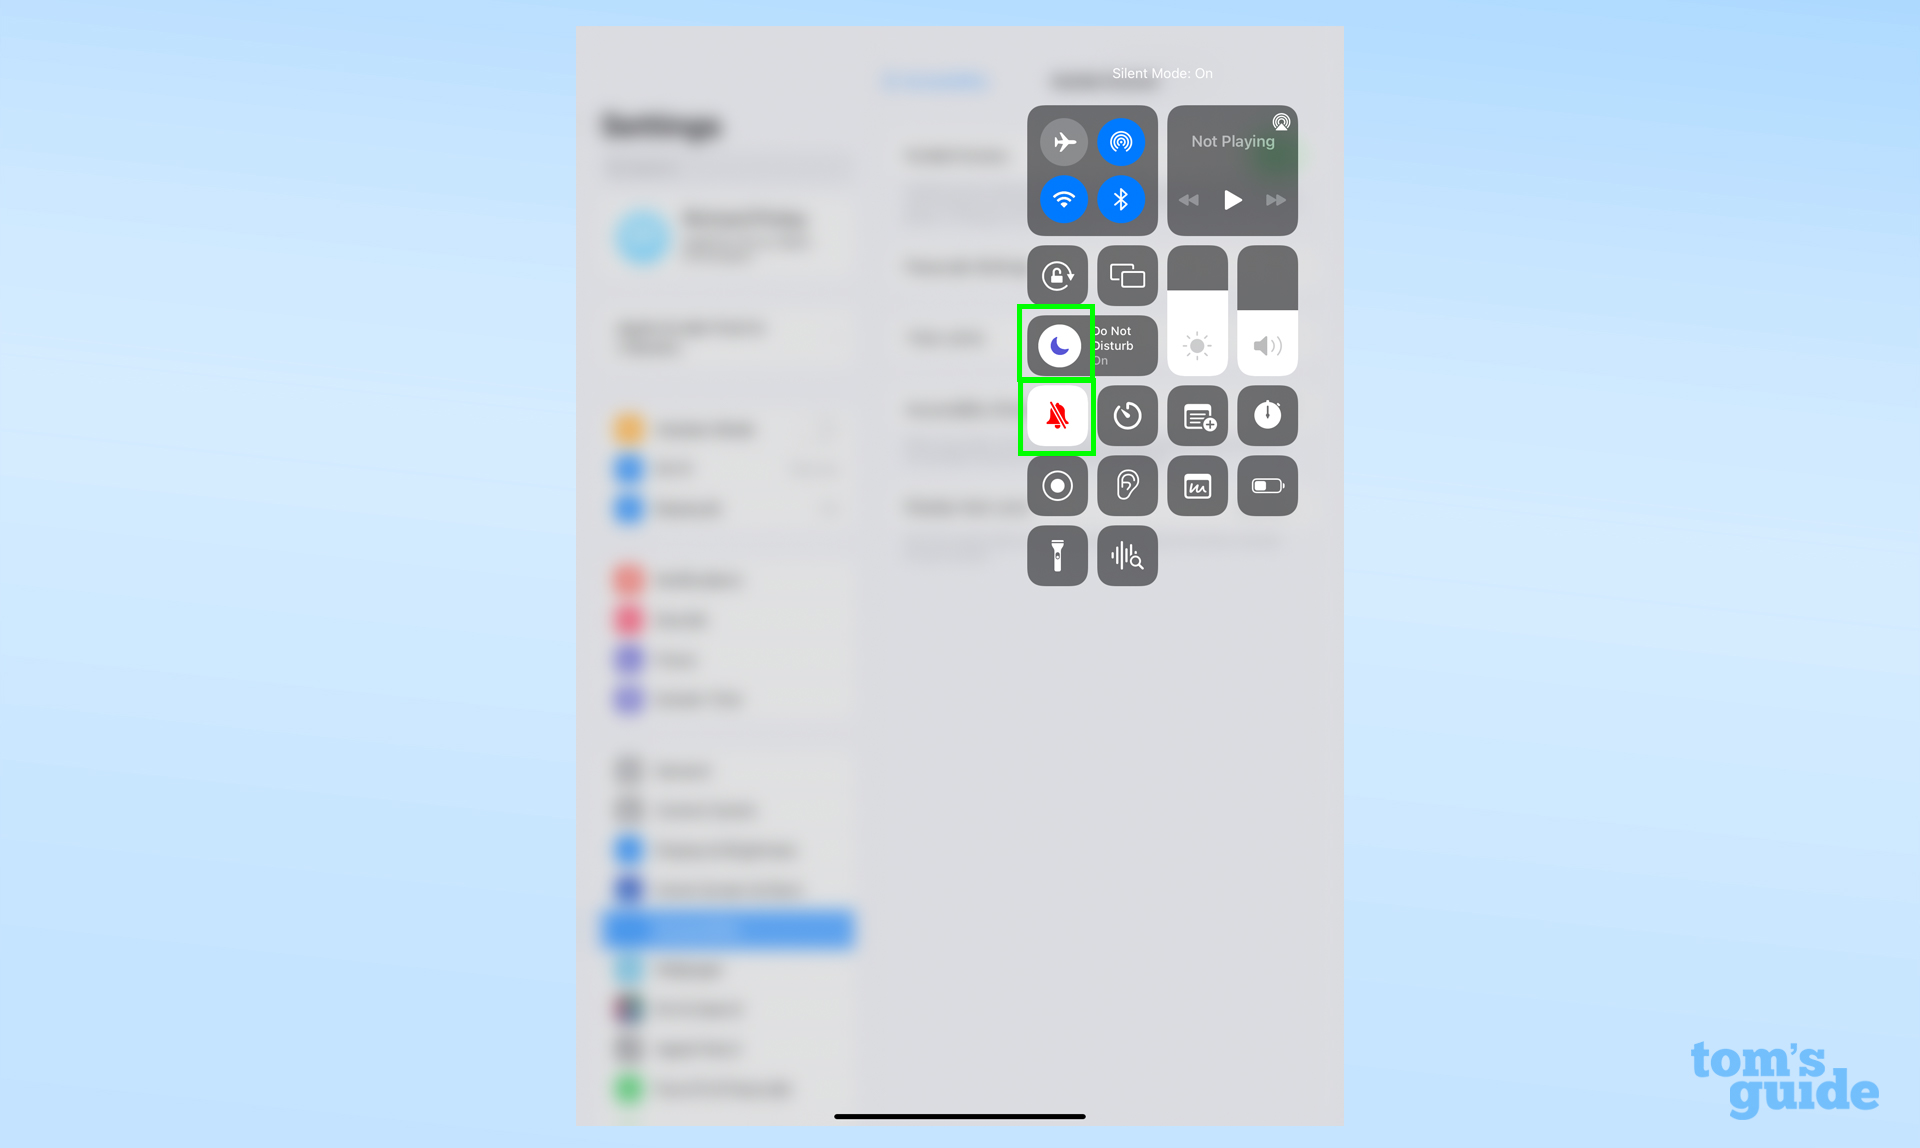 A screenshot showing the iPadOS Control Center, with the Do Not Disturb and Silent Mode buttons highlighted